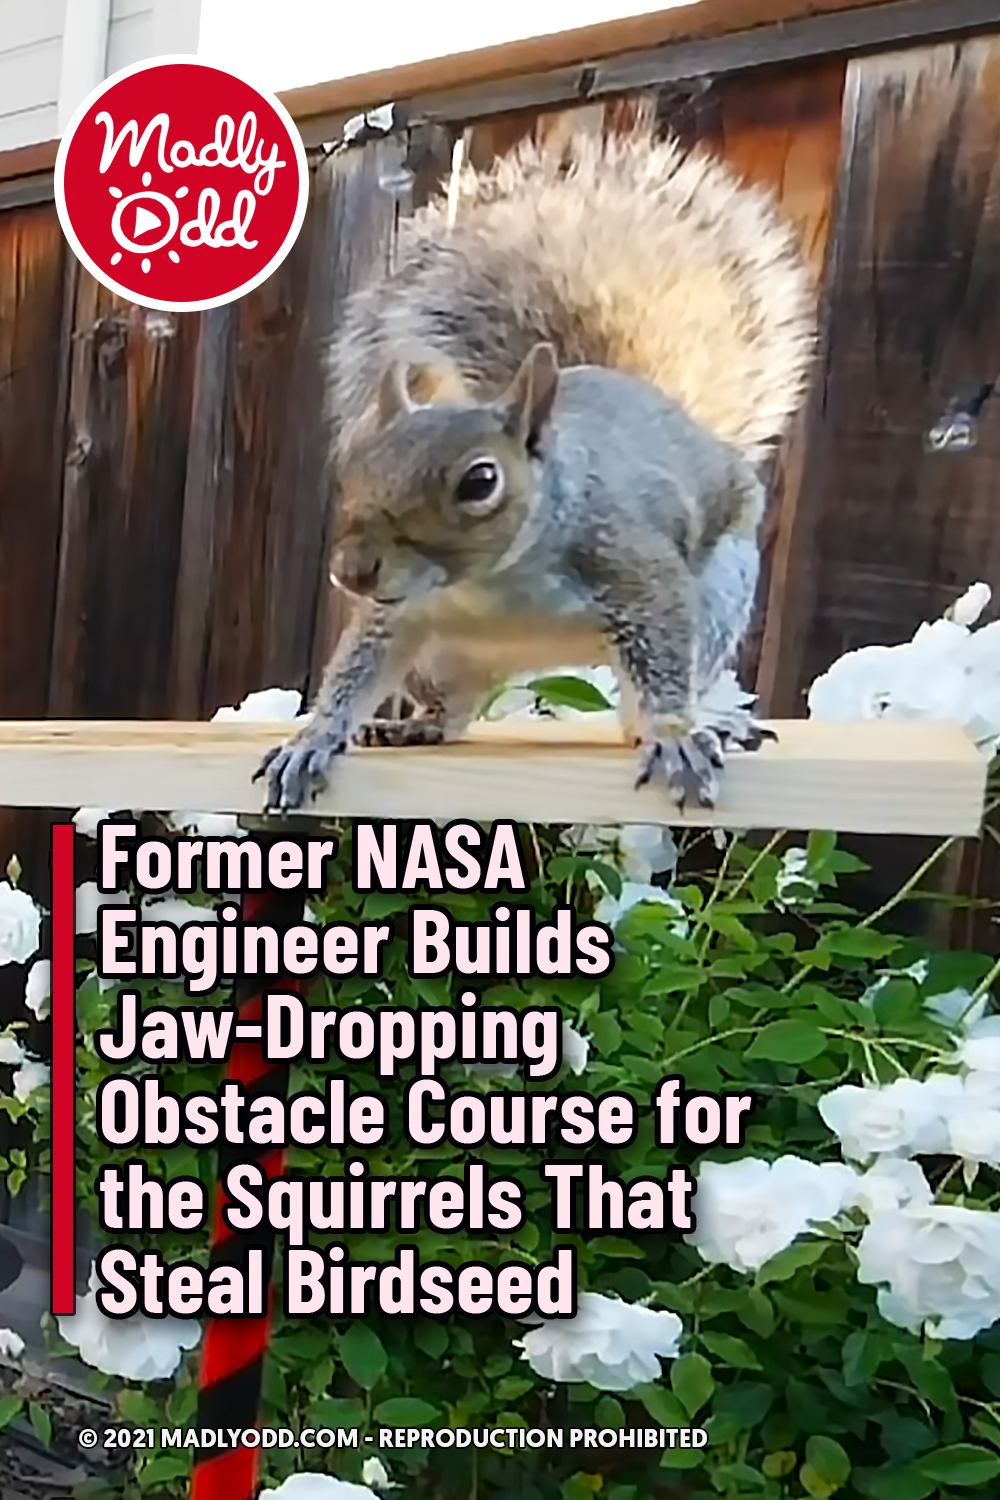 Former NASA Engineer Builds Jaw-Dropping Obstacle Course for the Squirrels That Steal Birdseed